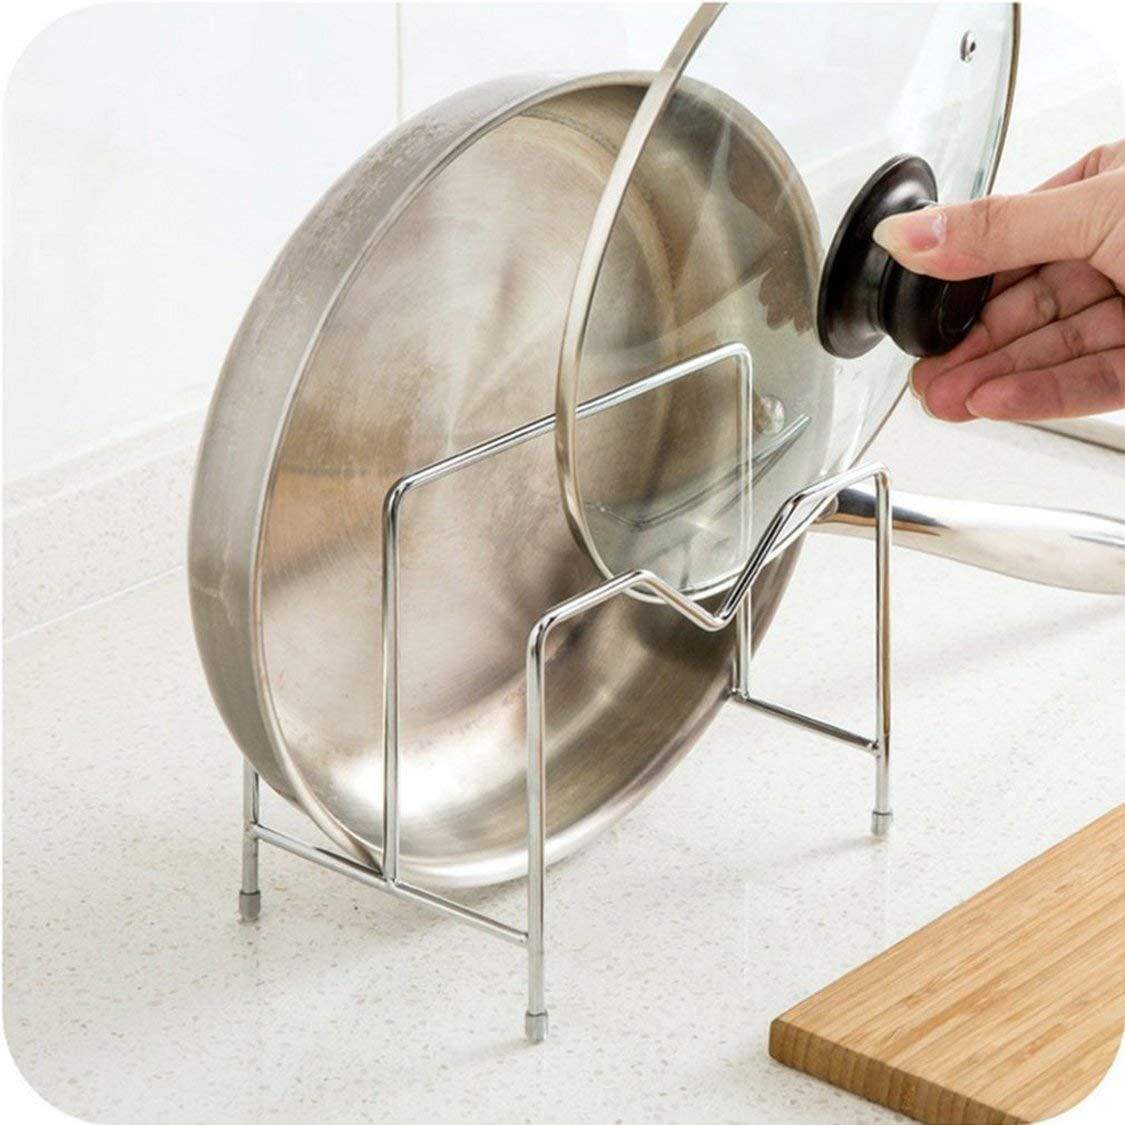 Exclusive stainless steel pot rack kitchen chopping board lid pot pan storage shelf drain tableware shelves cooking tools holder 1